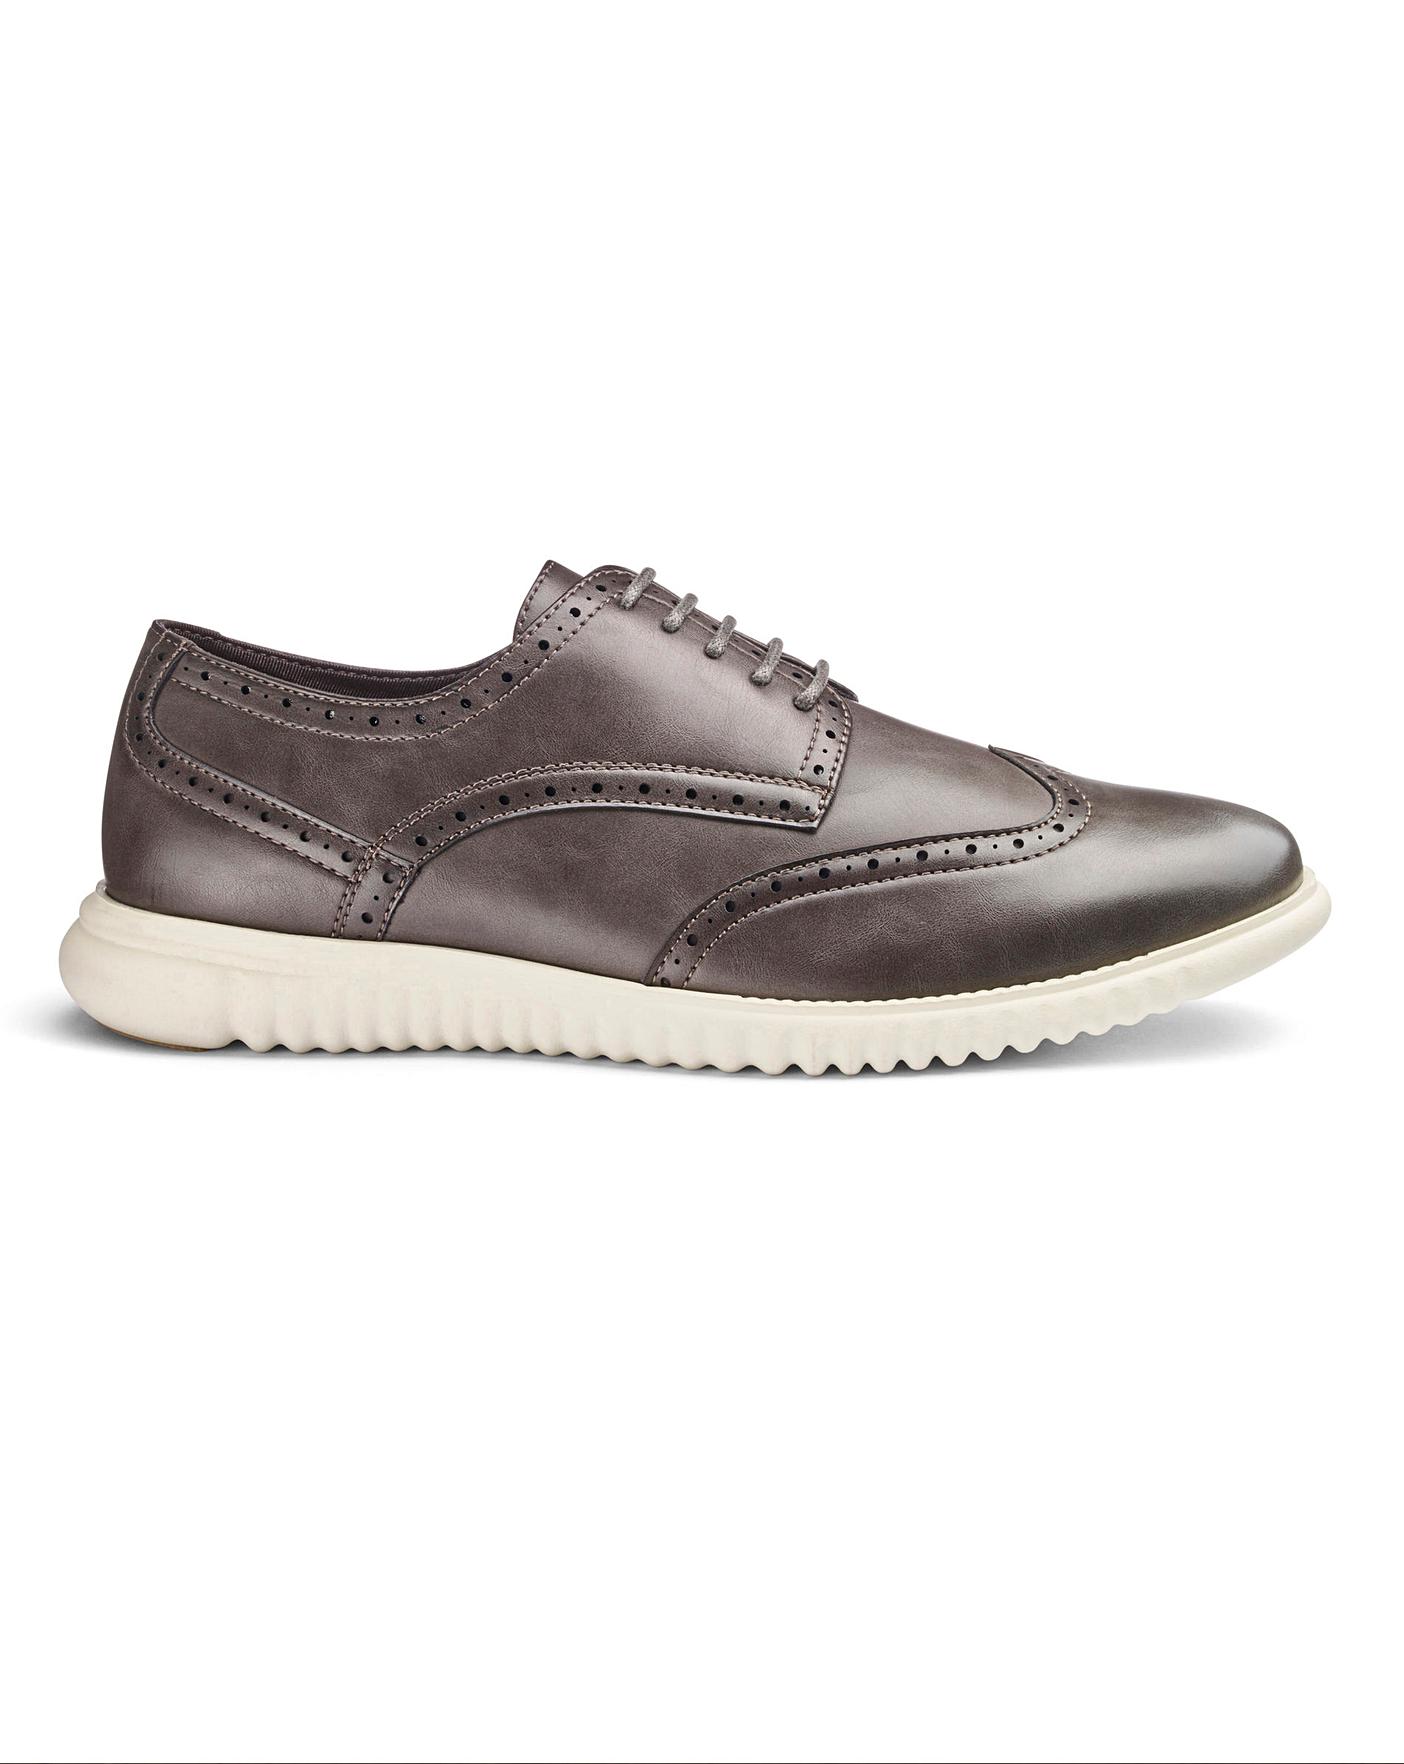 Leather Look Brogues Wide Fit